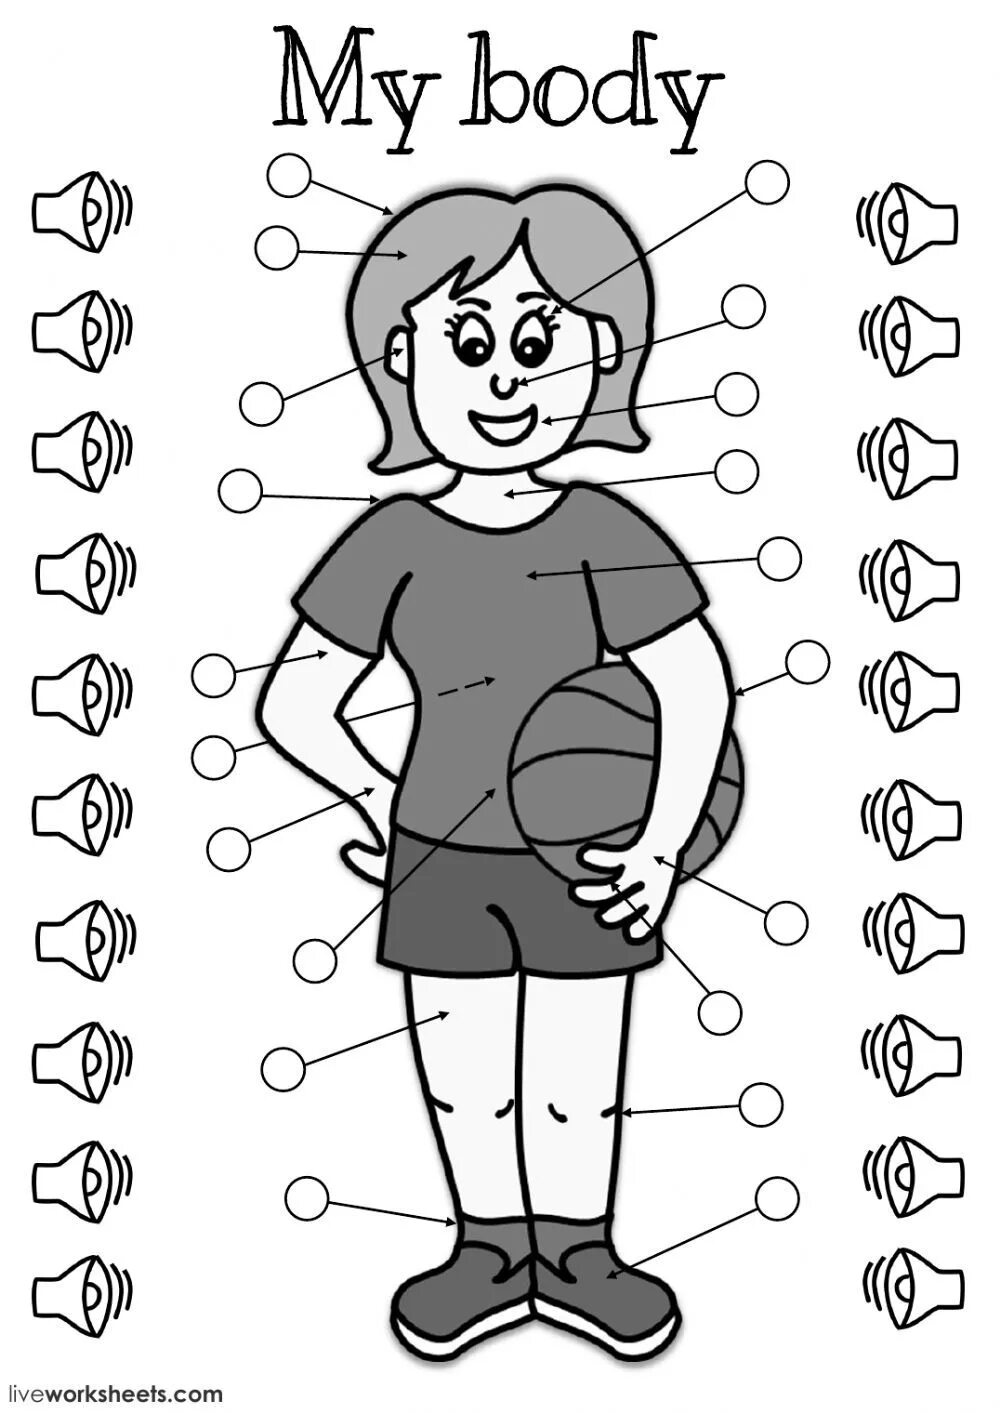 This is my body. Body Parts. Body Parts for Kids. Body Parts for Kids exercises. Parts of the body Worksheets for Kids.